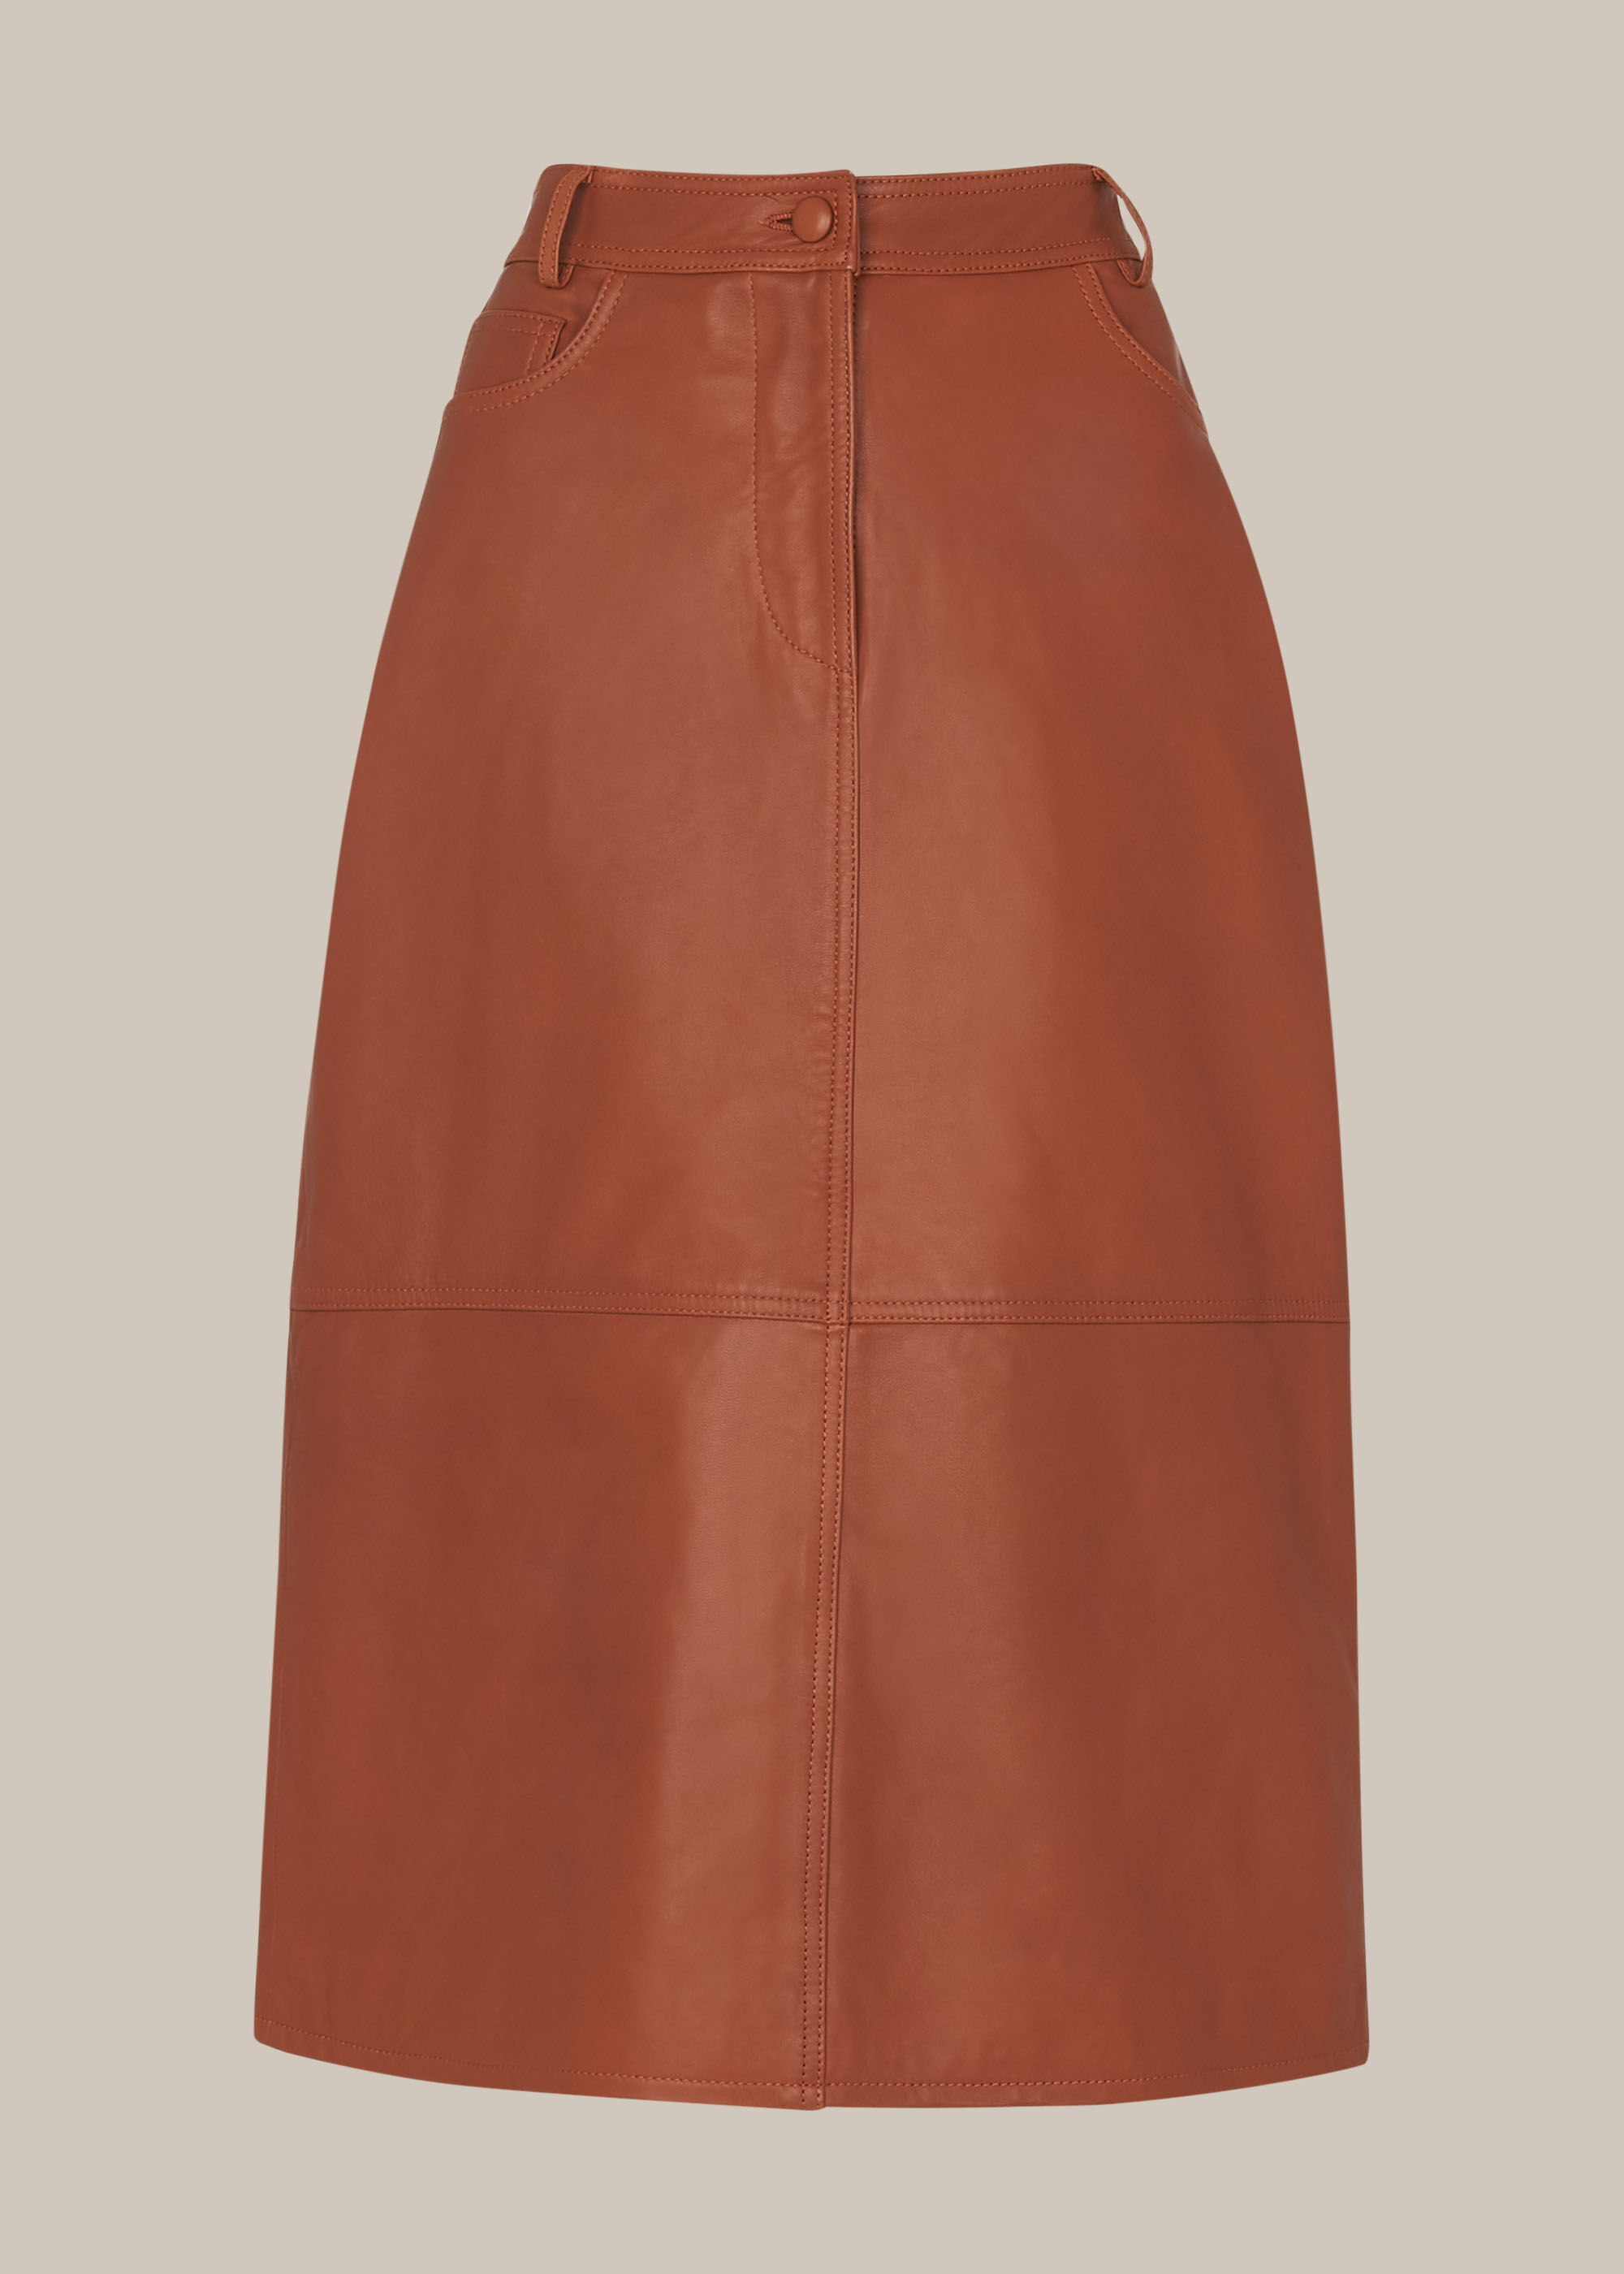 Tan Panelled Leather Skirt | WHISTLES 